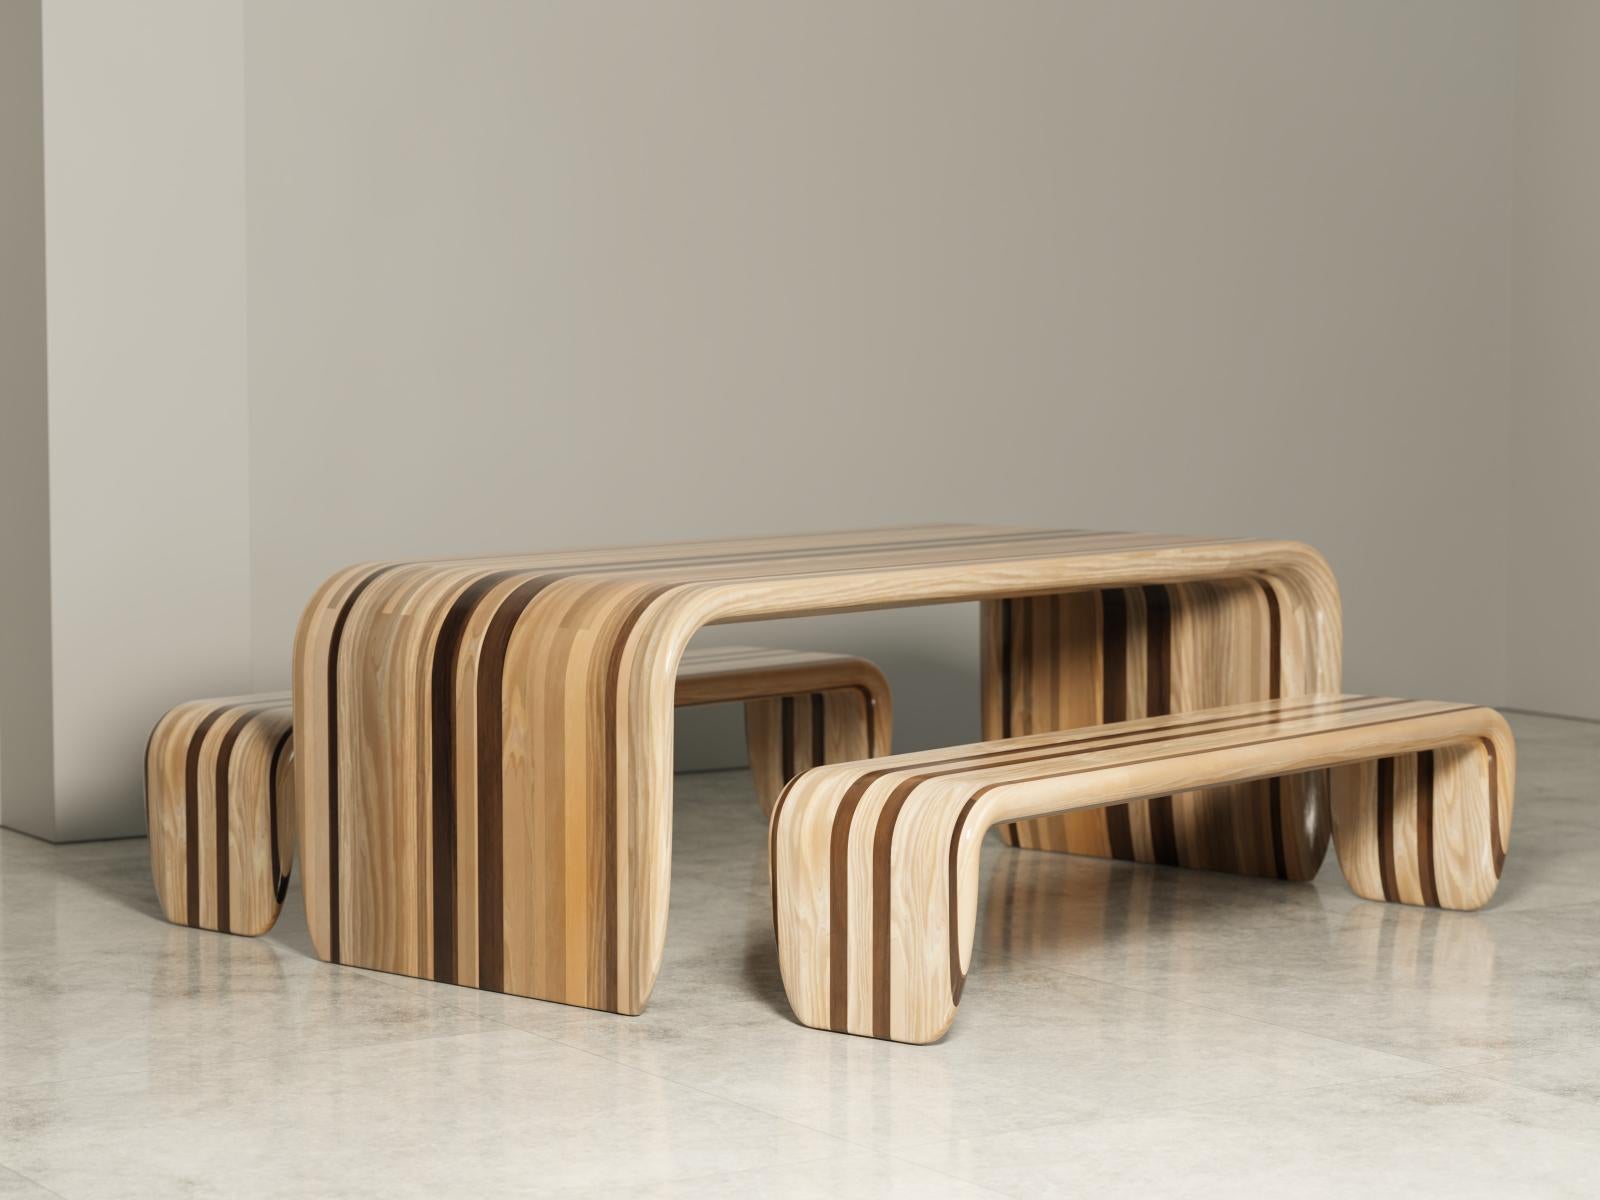 Set of surf-ace table and 2 benches by Duffy London
Limited edition
Dimensions: Table W 190 x D 100 x H 75 cm / Benches W 170 x D 45 x 44 cm
Materials: ash, walnut.

The surf-ace table is limited to 20 editions.

Surf's up! and dinner's on